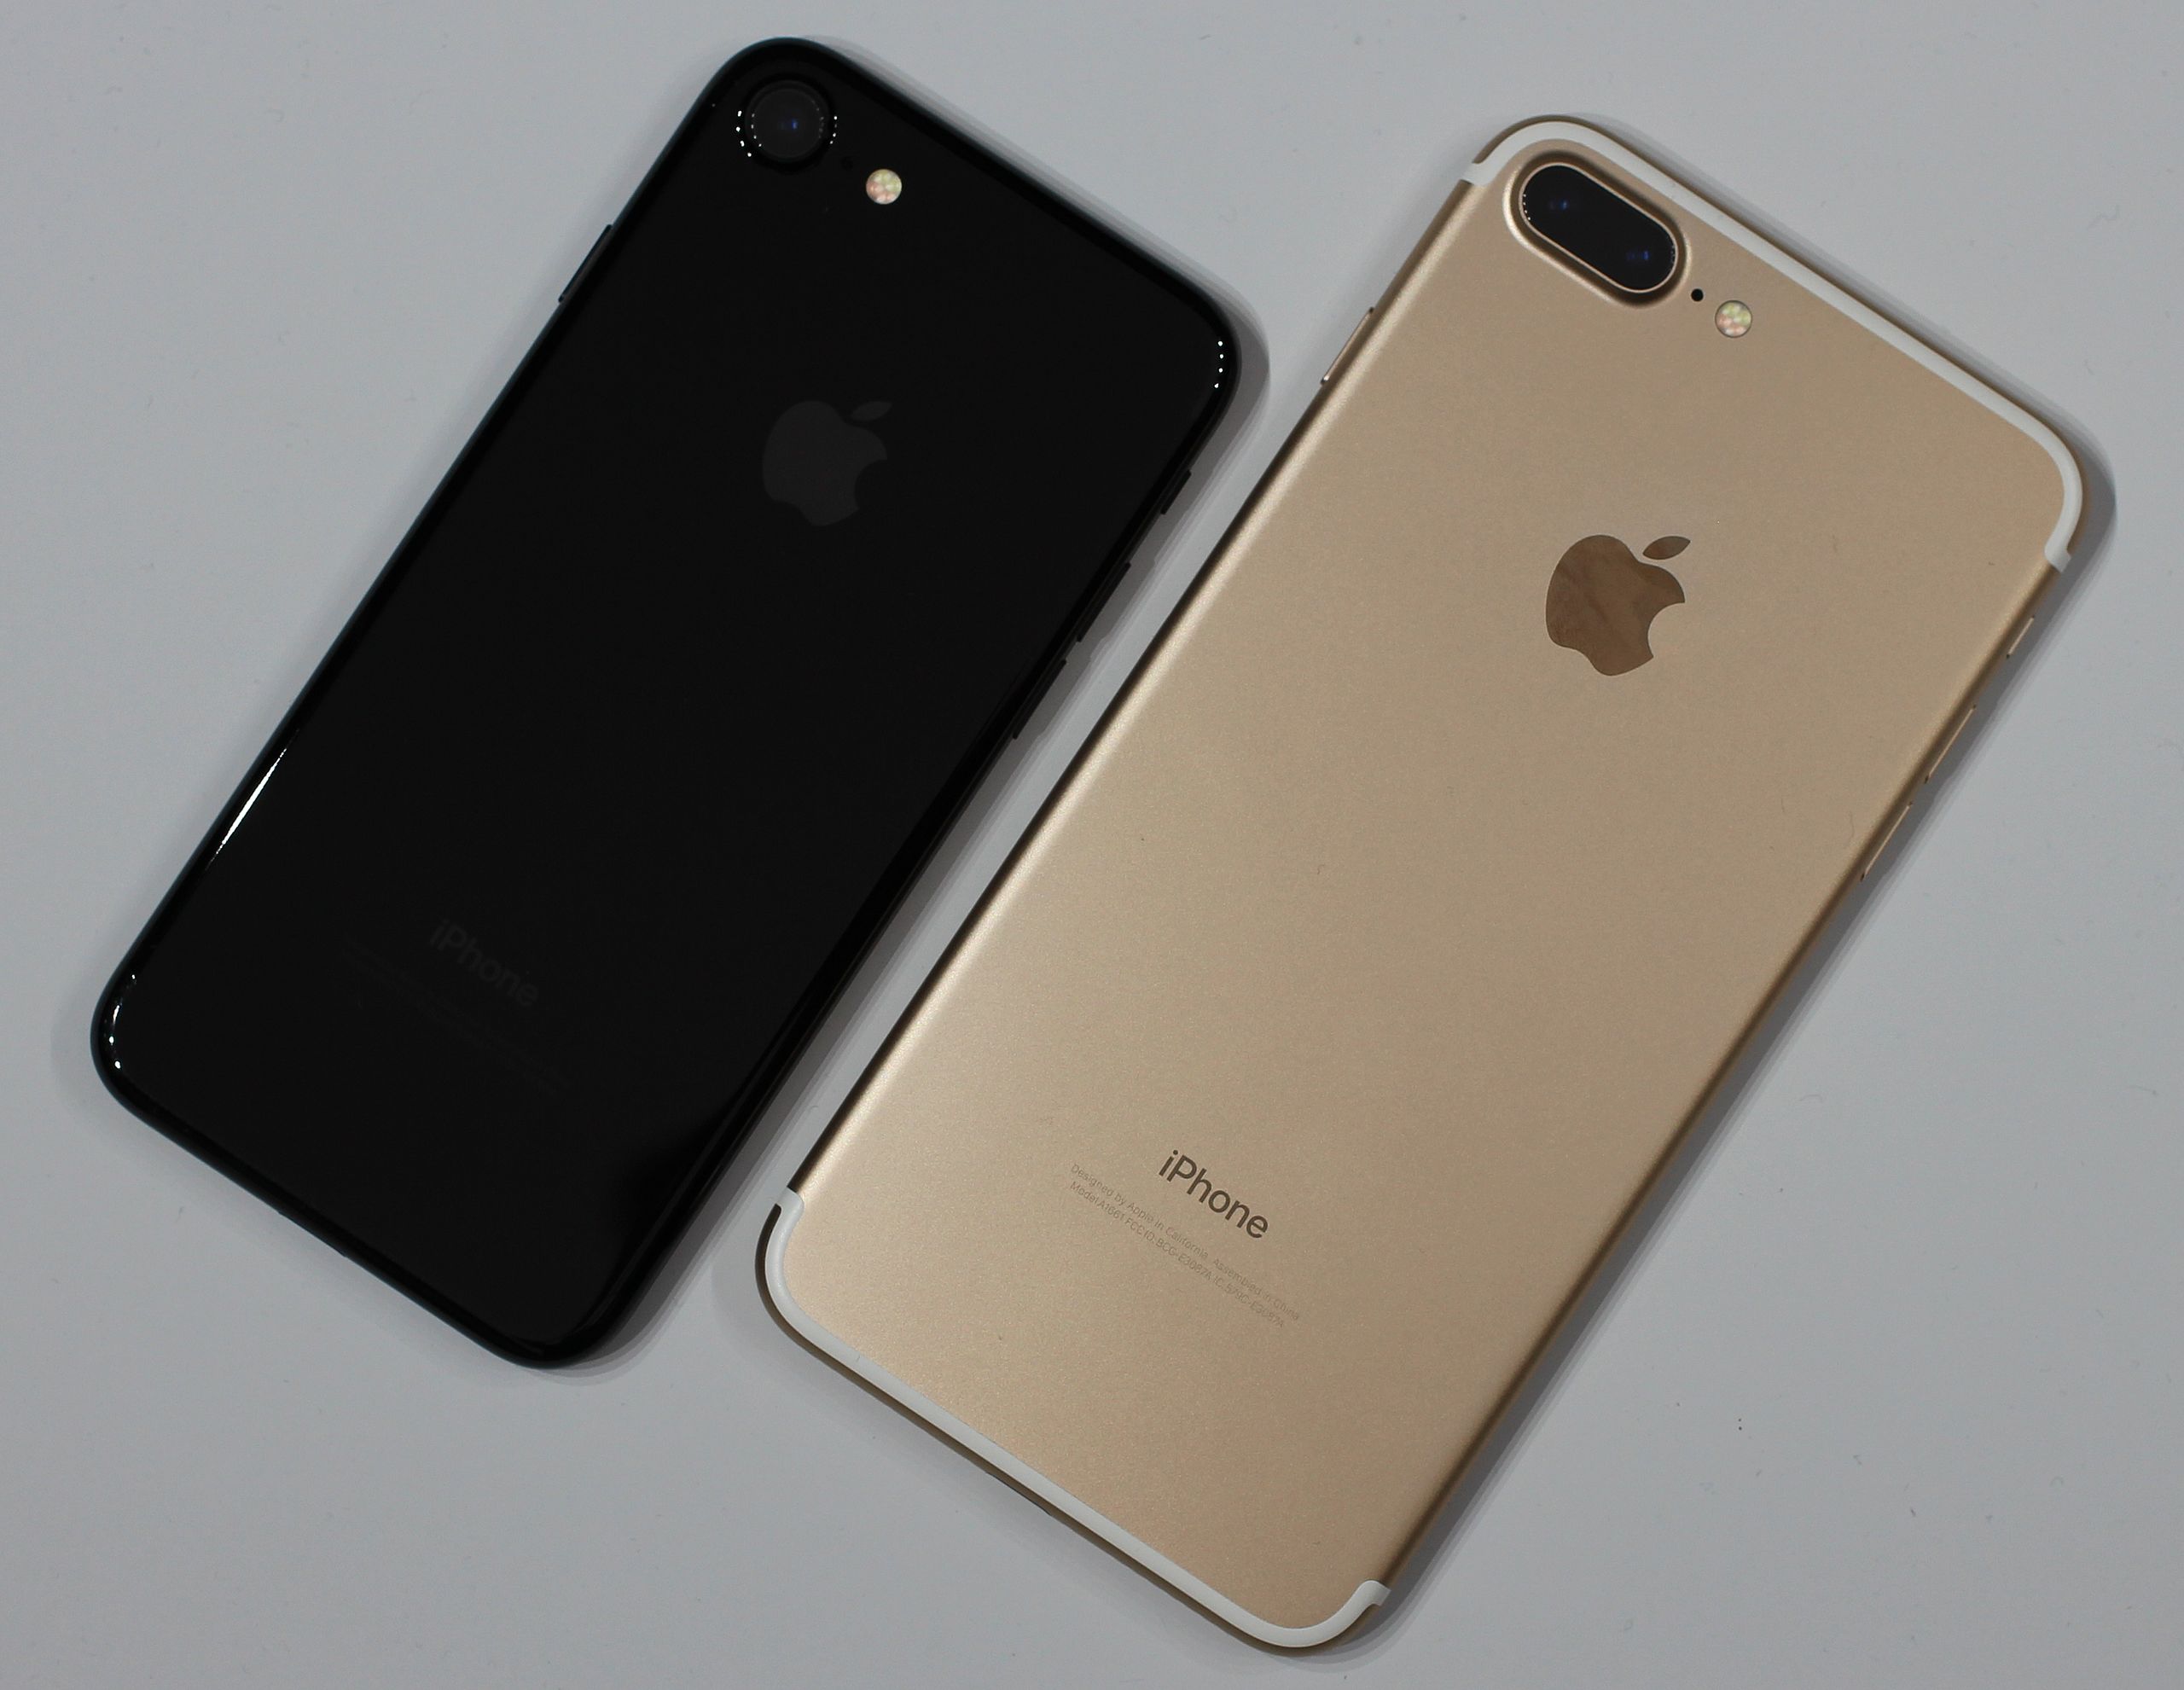 File:IPhone 7 iPhone 7 - Wikimedia Commons